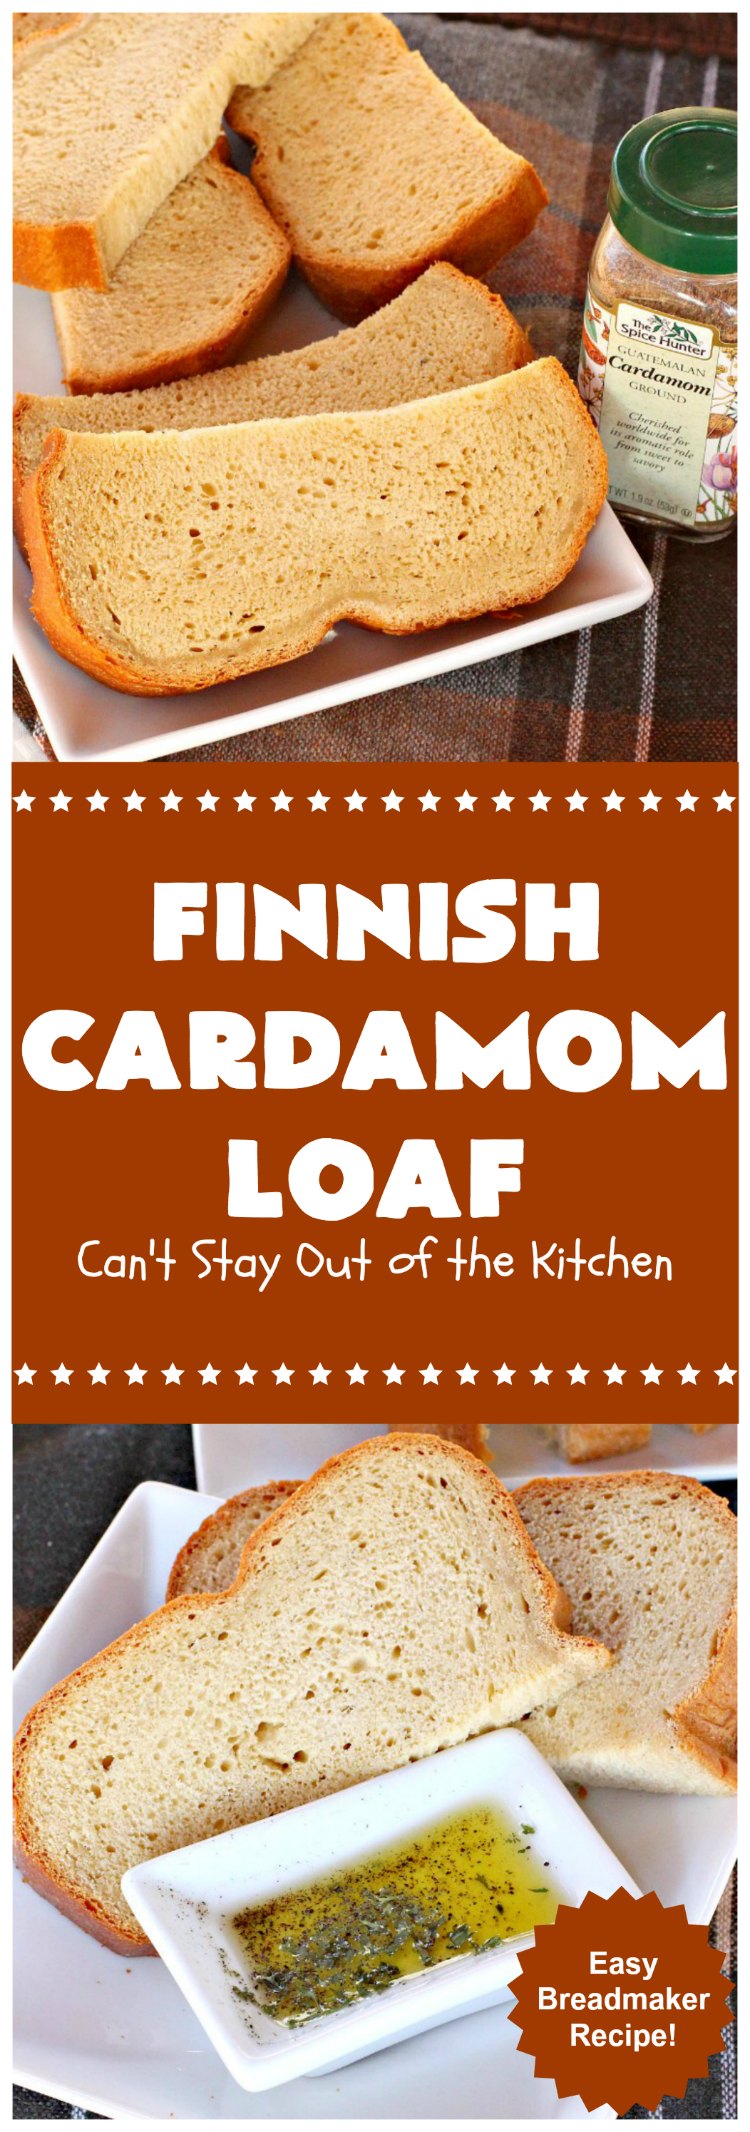 Finnish Cardamom Loaf | Can't Stay Out of the Kitchen | this fantastic home-baked #bread is so easy since it's made in the #breadmaker. Perfect for #breakfast or as a side for soup, chili or other comfort food meals. #cardamom #Finnish #Finland #FinnishCardamomLoaf #HomemadeBread